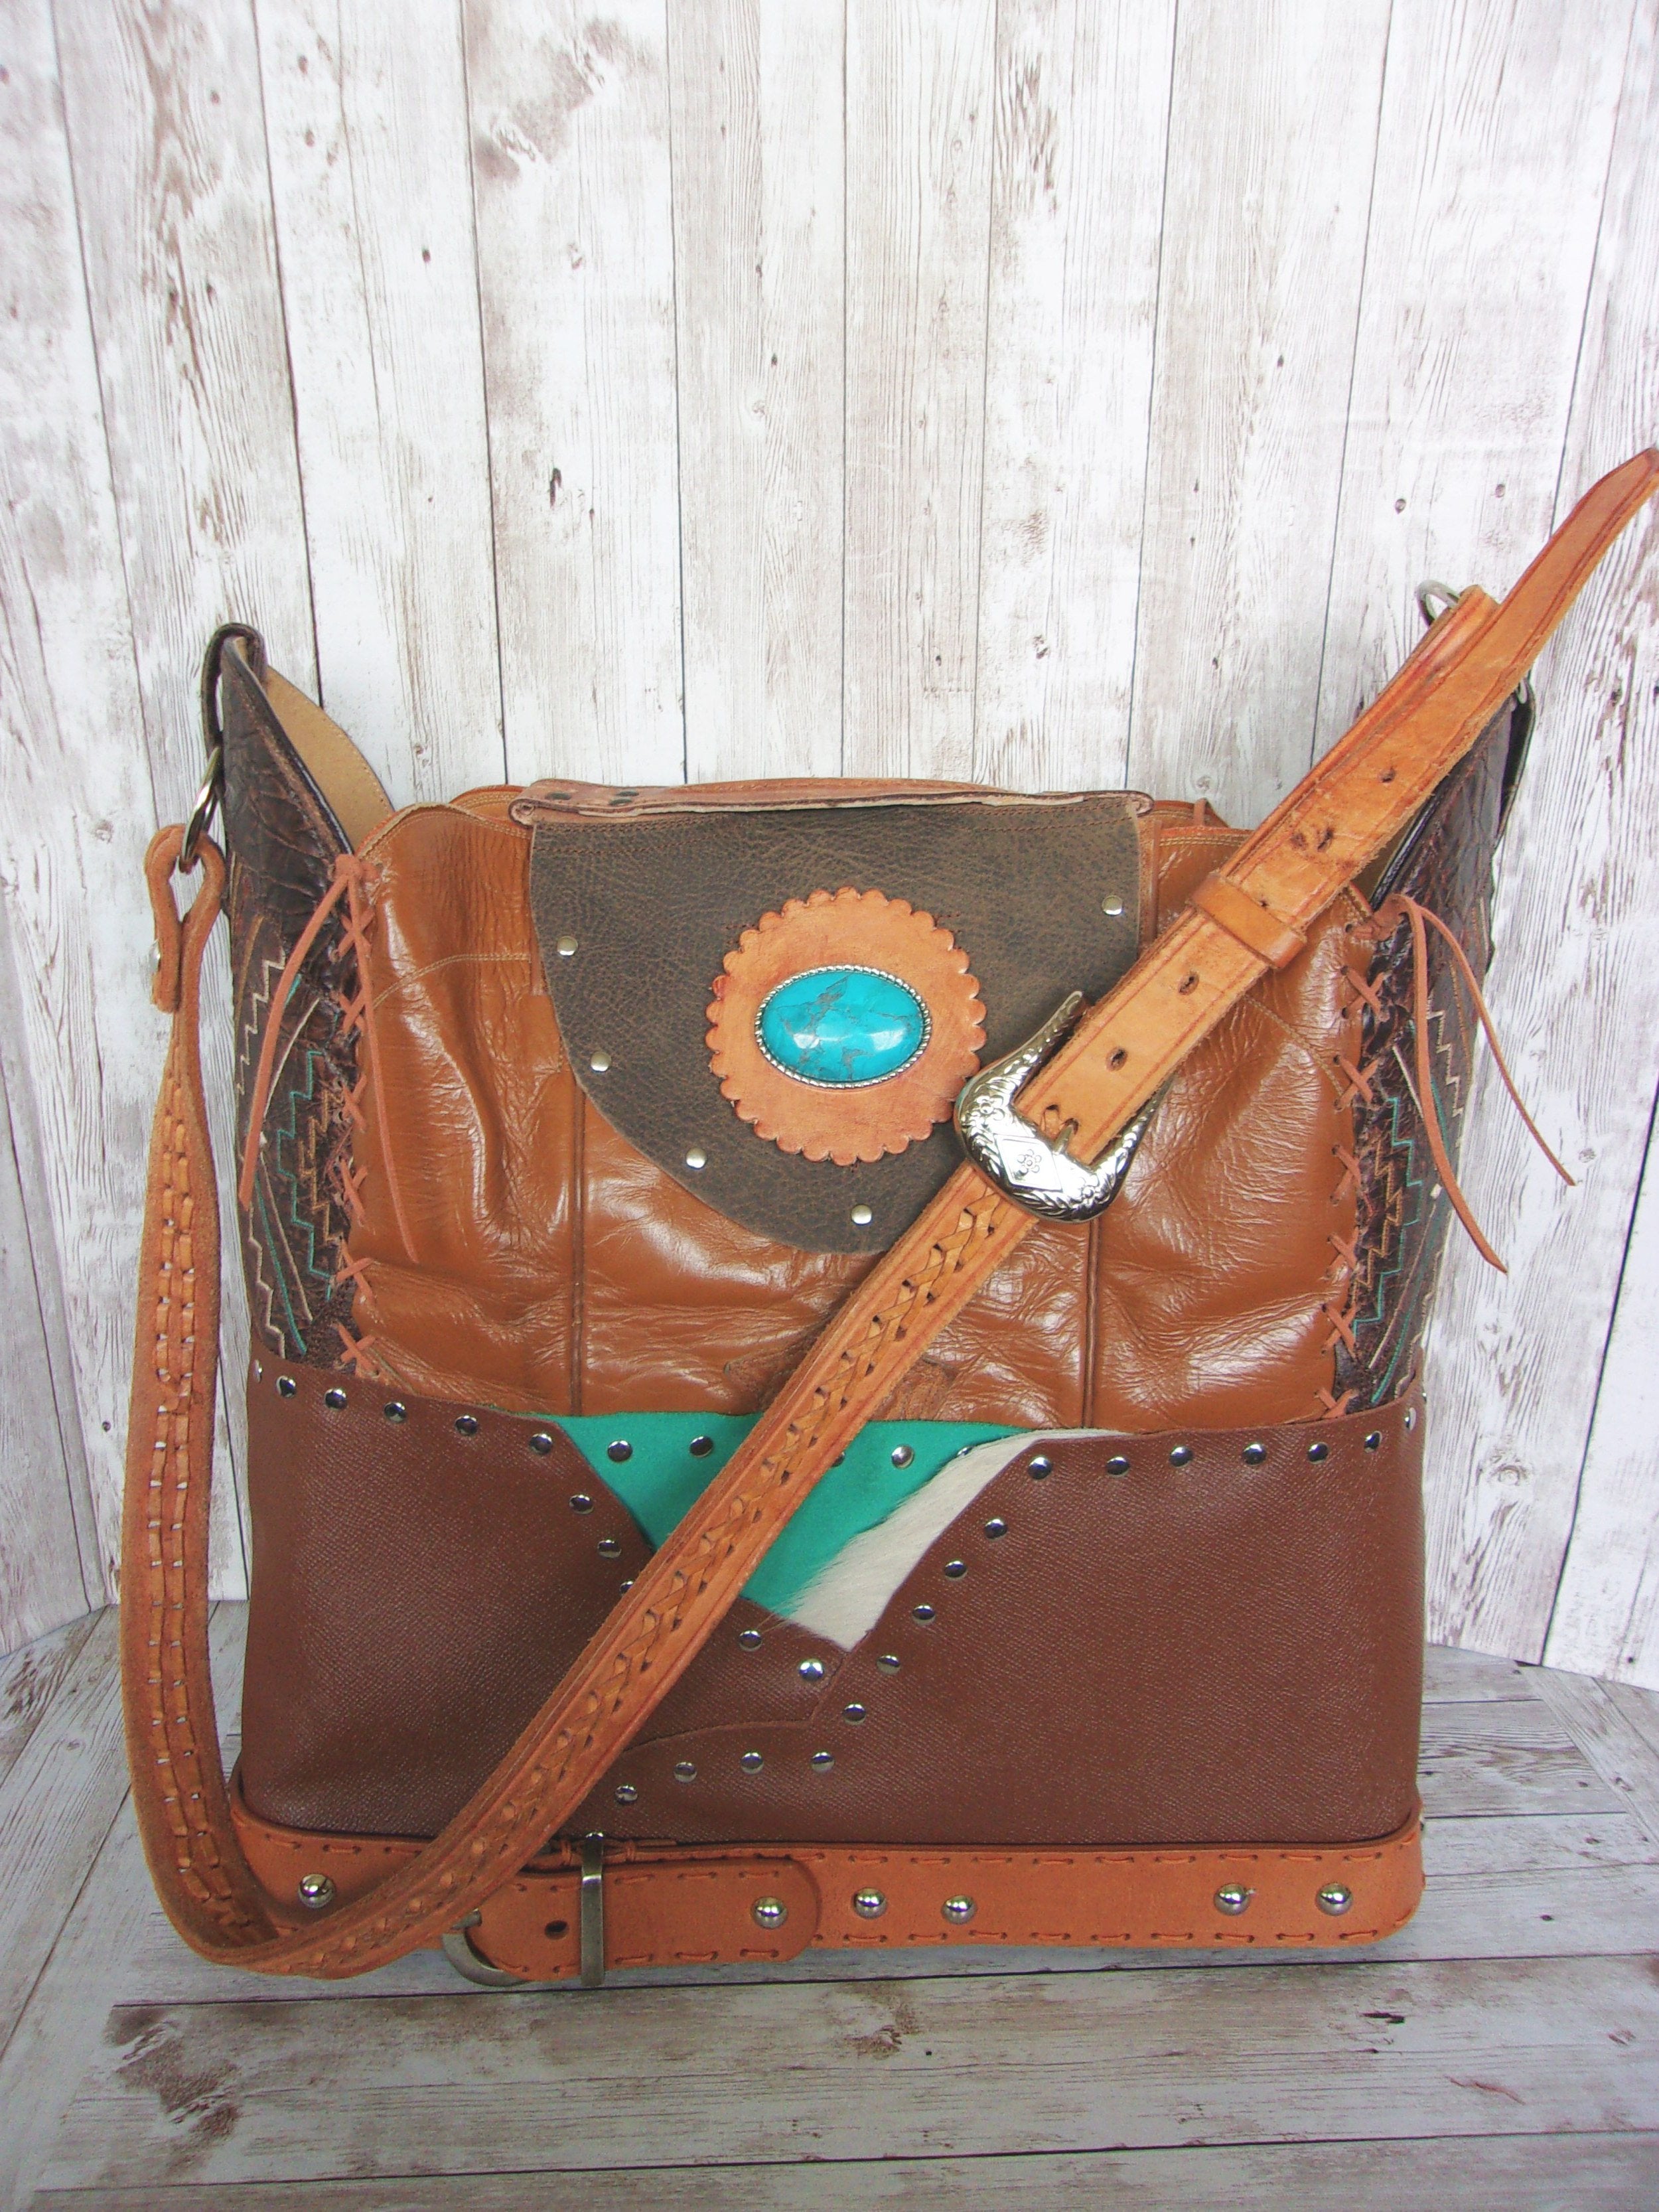 Western Laptop Tote - Extra Large Cowboy Boot Purse - Western Travel Bag LT37 cowboy boot purses, western fringe purse, handmade leather purses, boot purse, handmade western purse, custom leather handbags Chris Thompson Bags